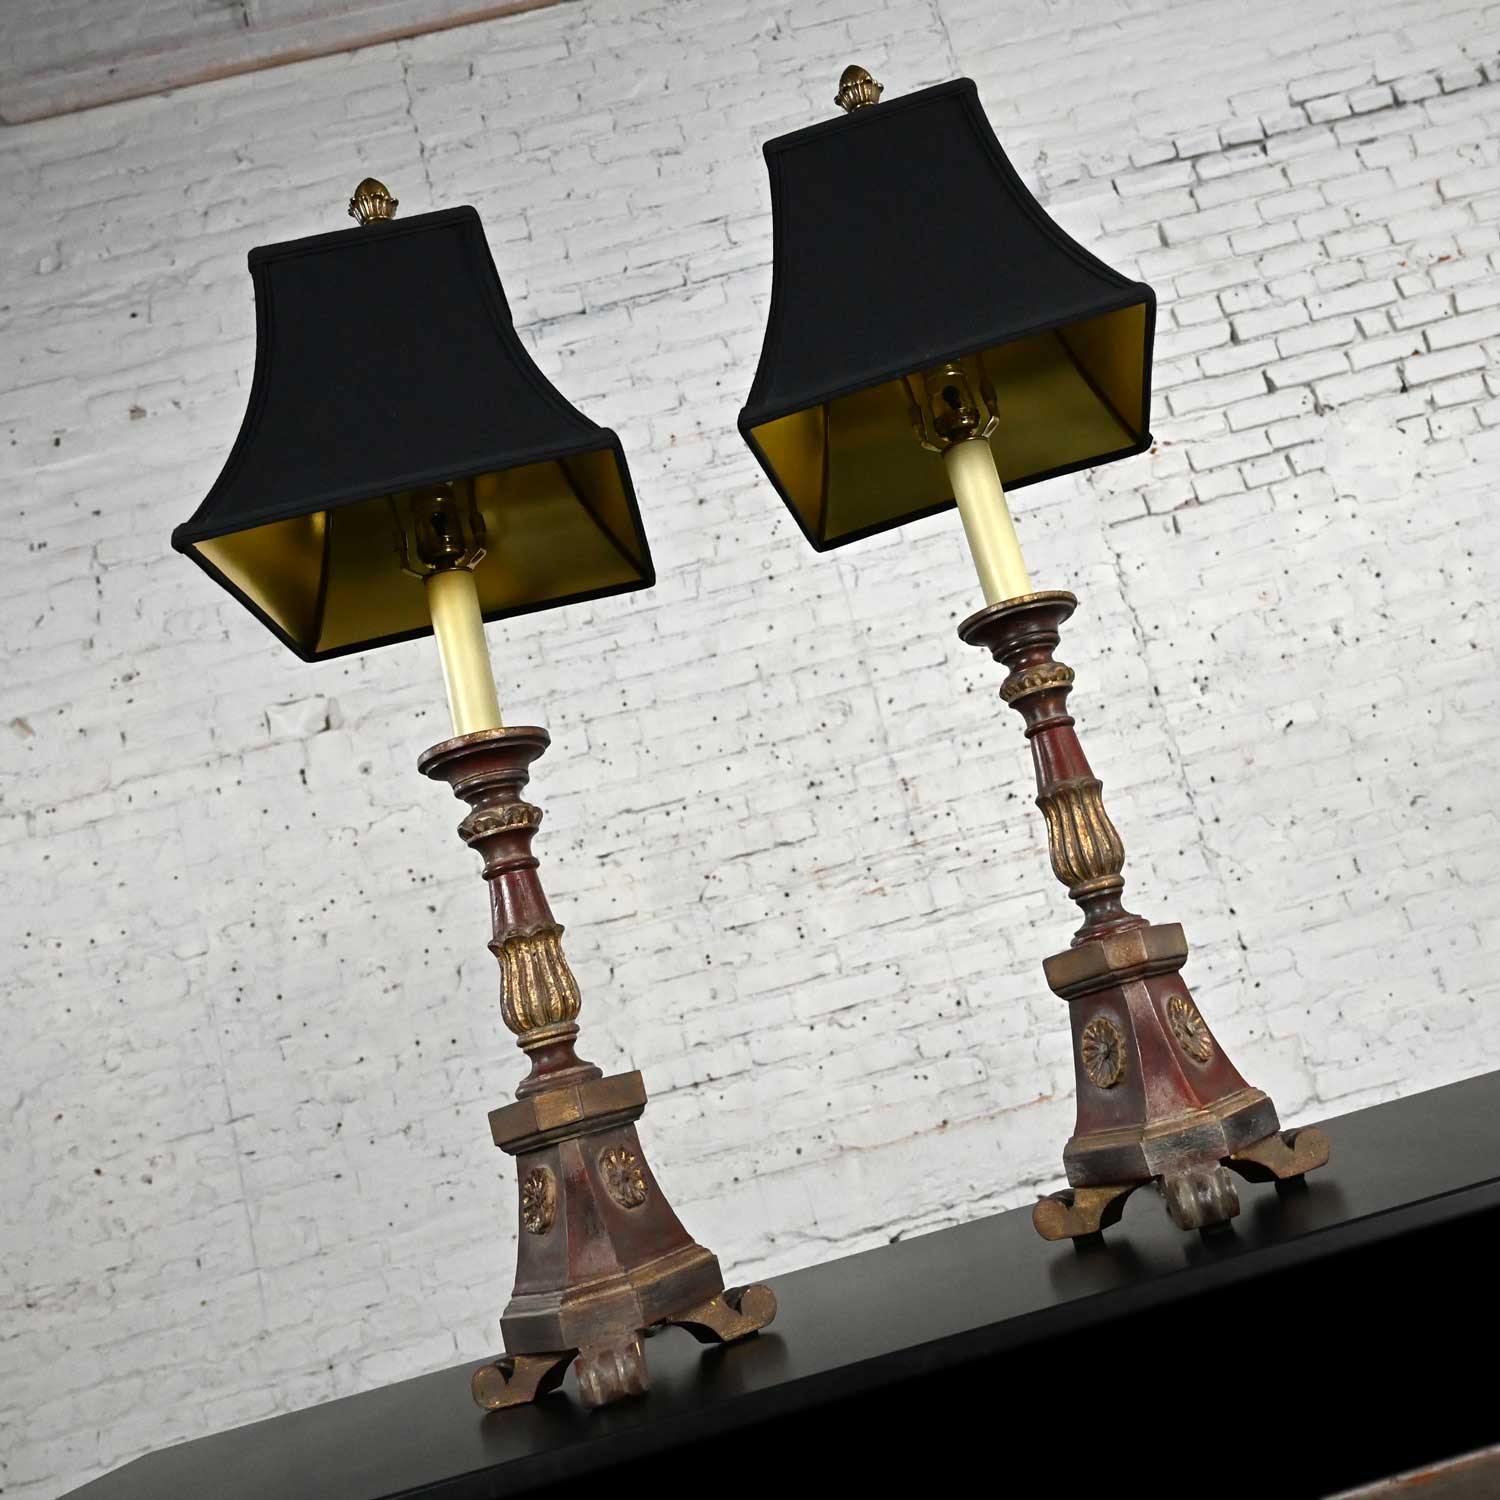 Late 20th Century Chapman Regency Style Pair Painted & Gilt Carved Wood Candlestick Lamps Black Shades